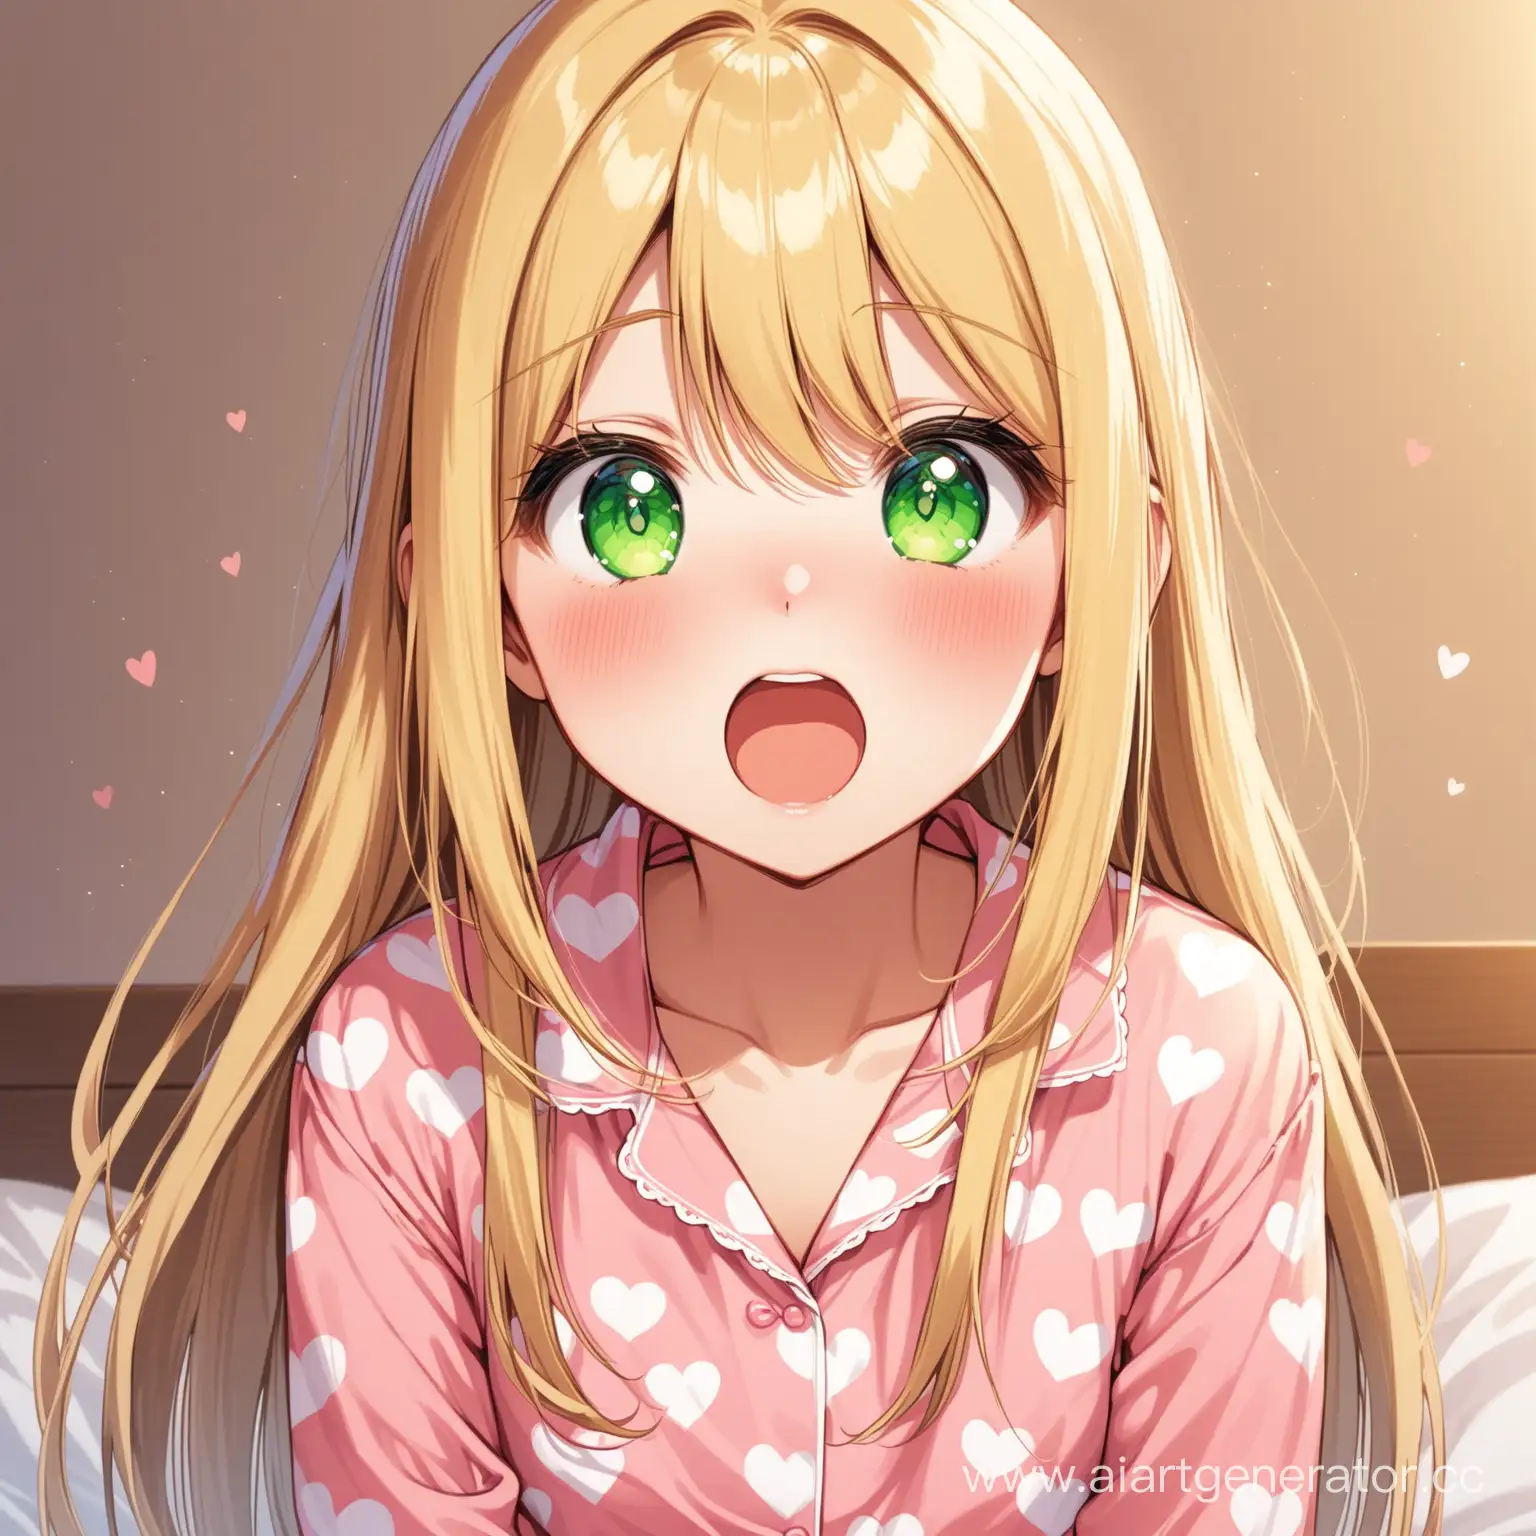 Excited-Girl-in-Heart-Pattern-Pajamas-with-Long-Blonde-Hair